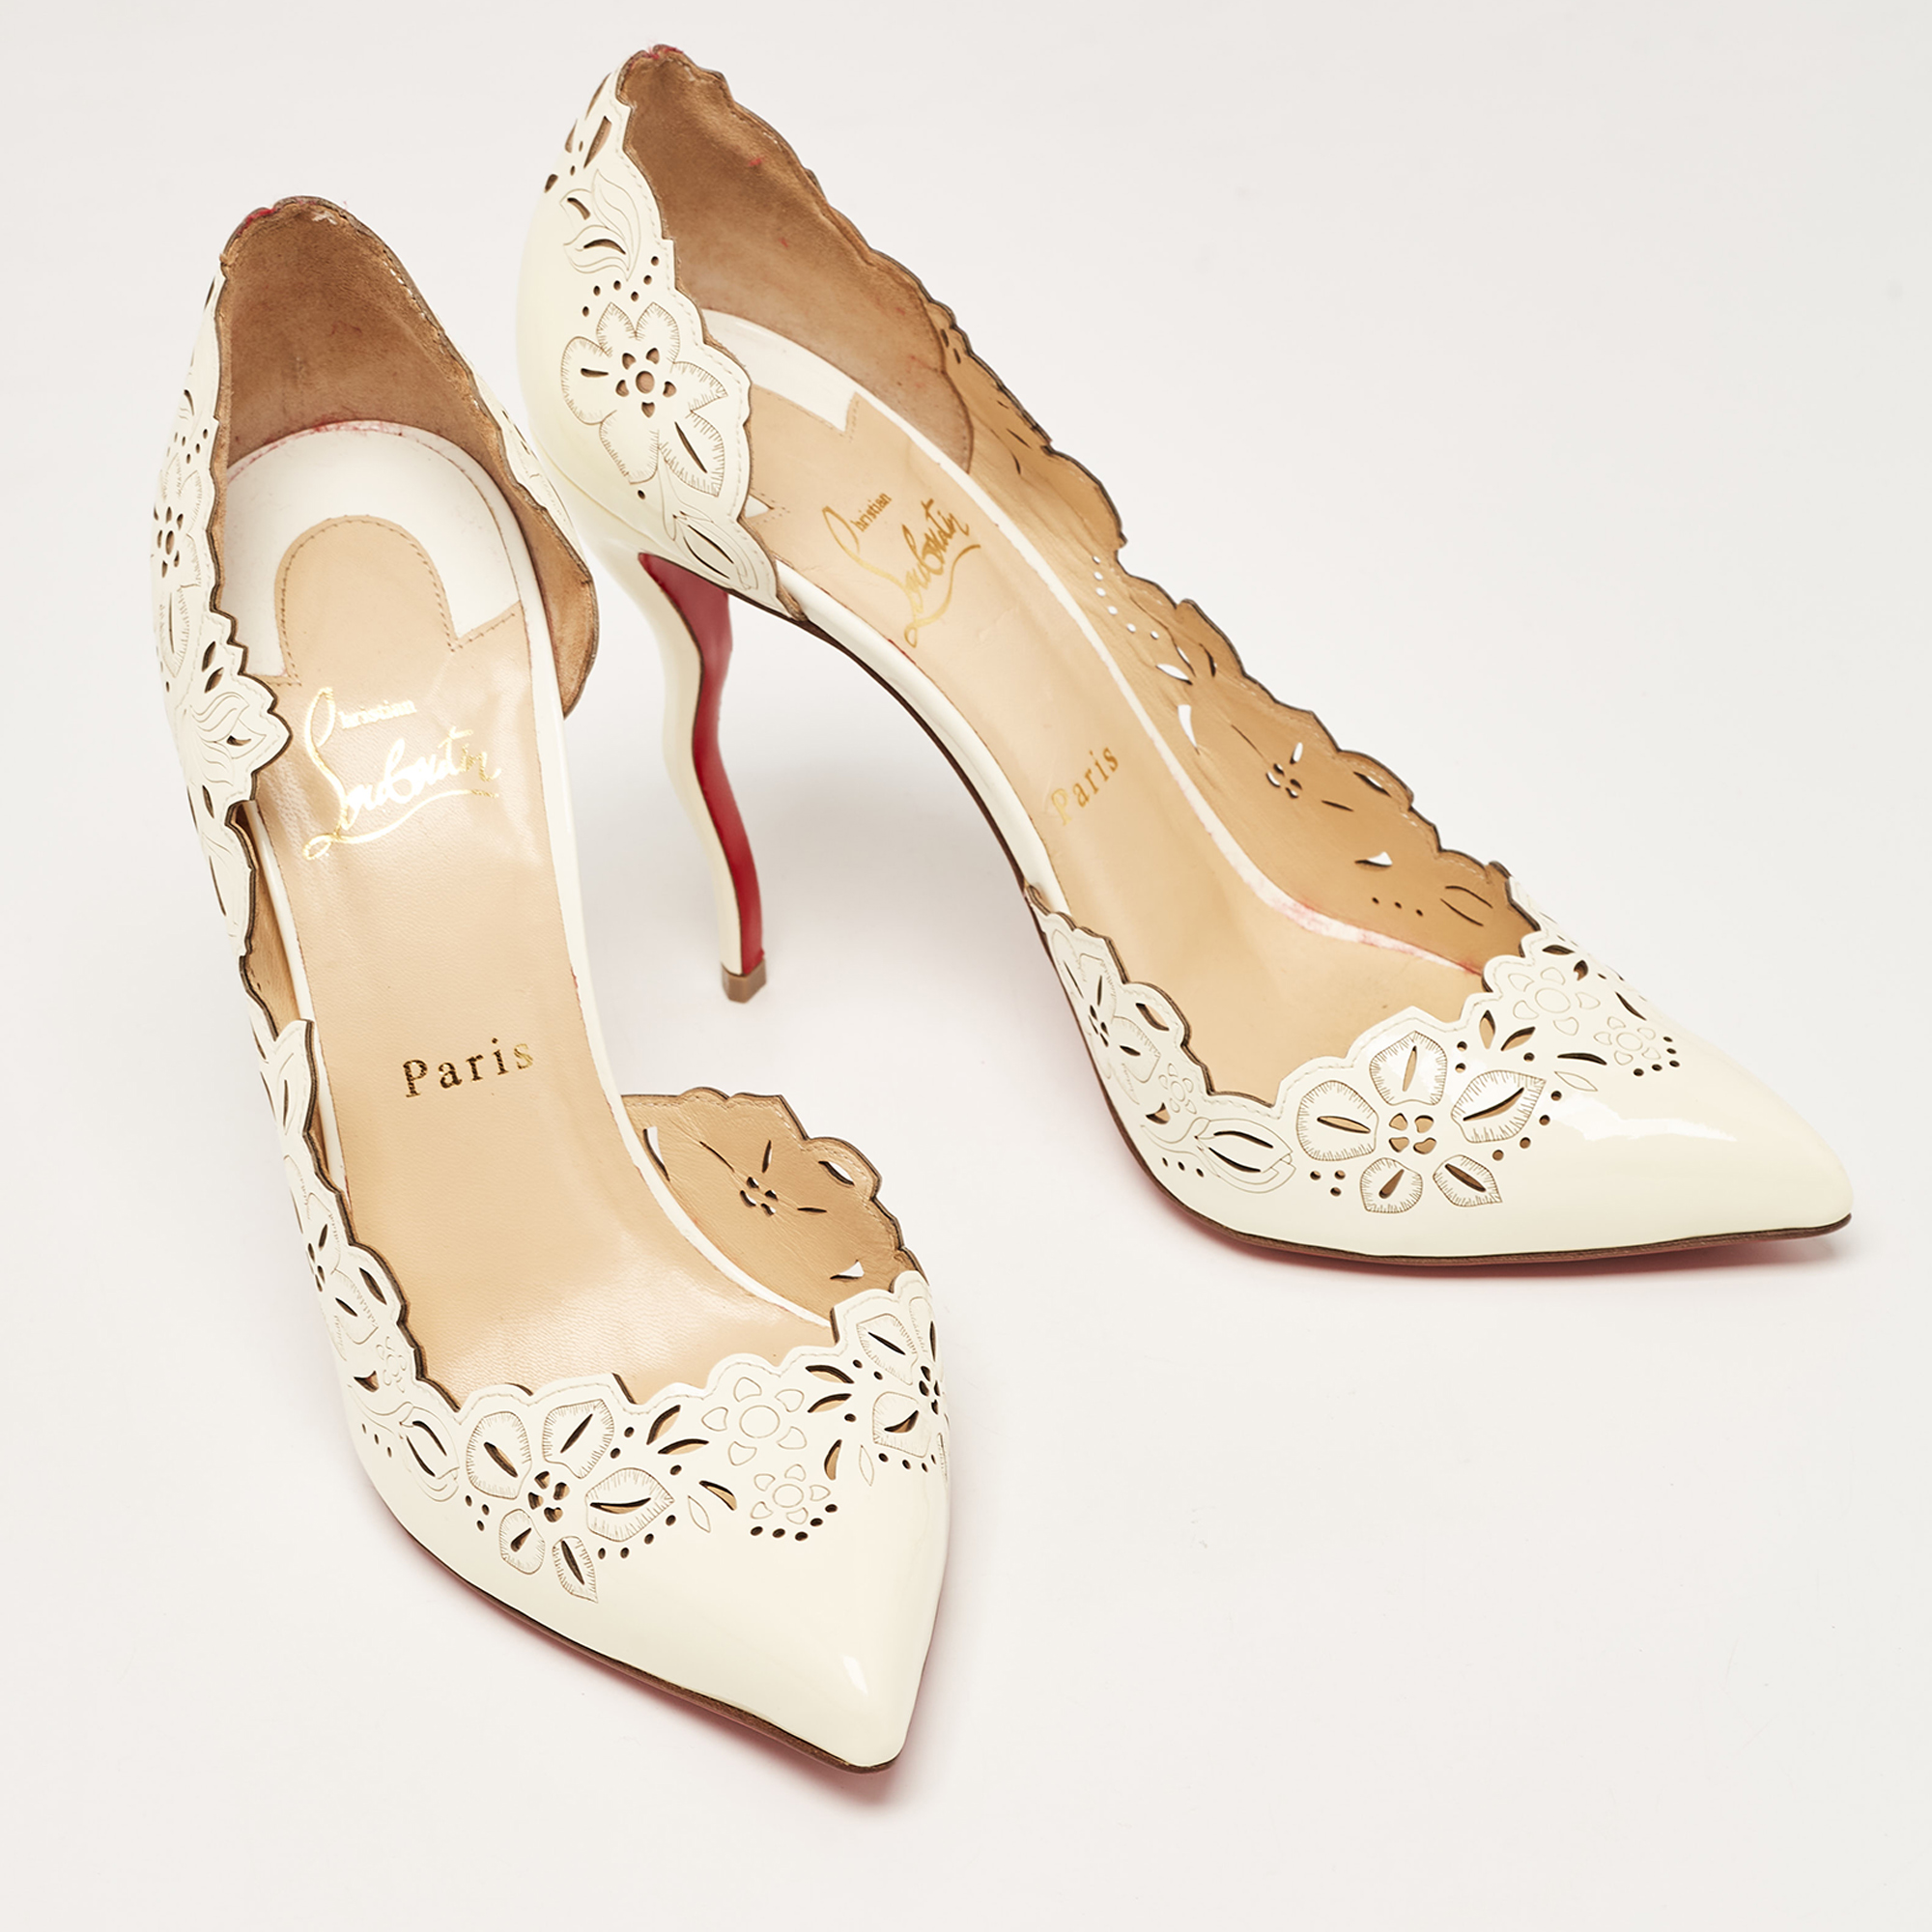 Christian Louboutin Off White Patent Leather Floral Laser Cut D'Orsay Pumps Size 40